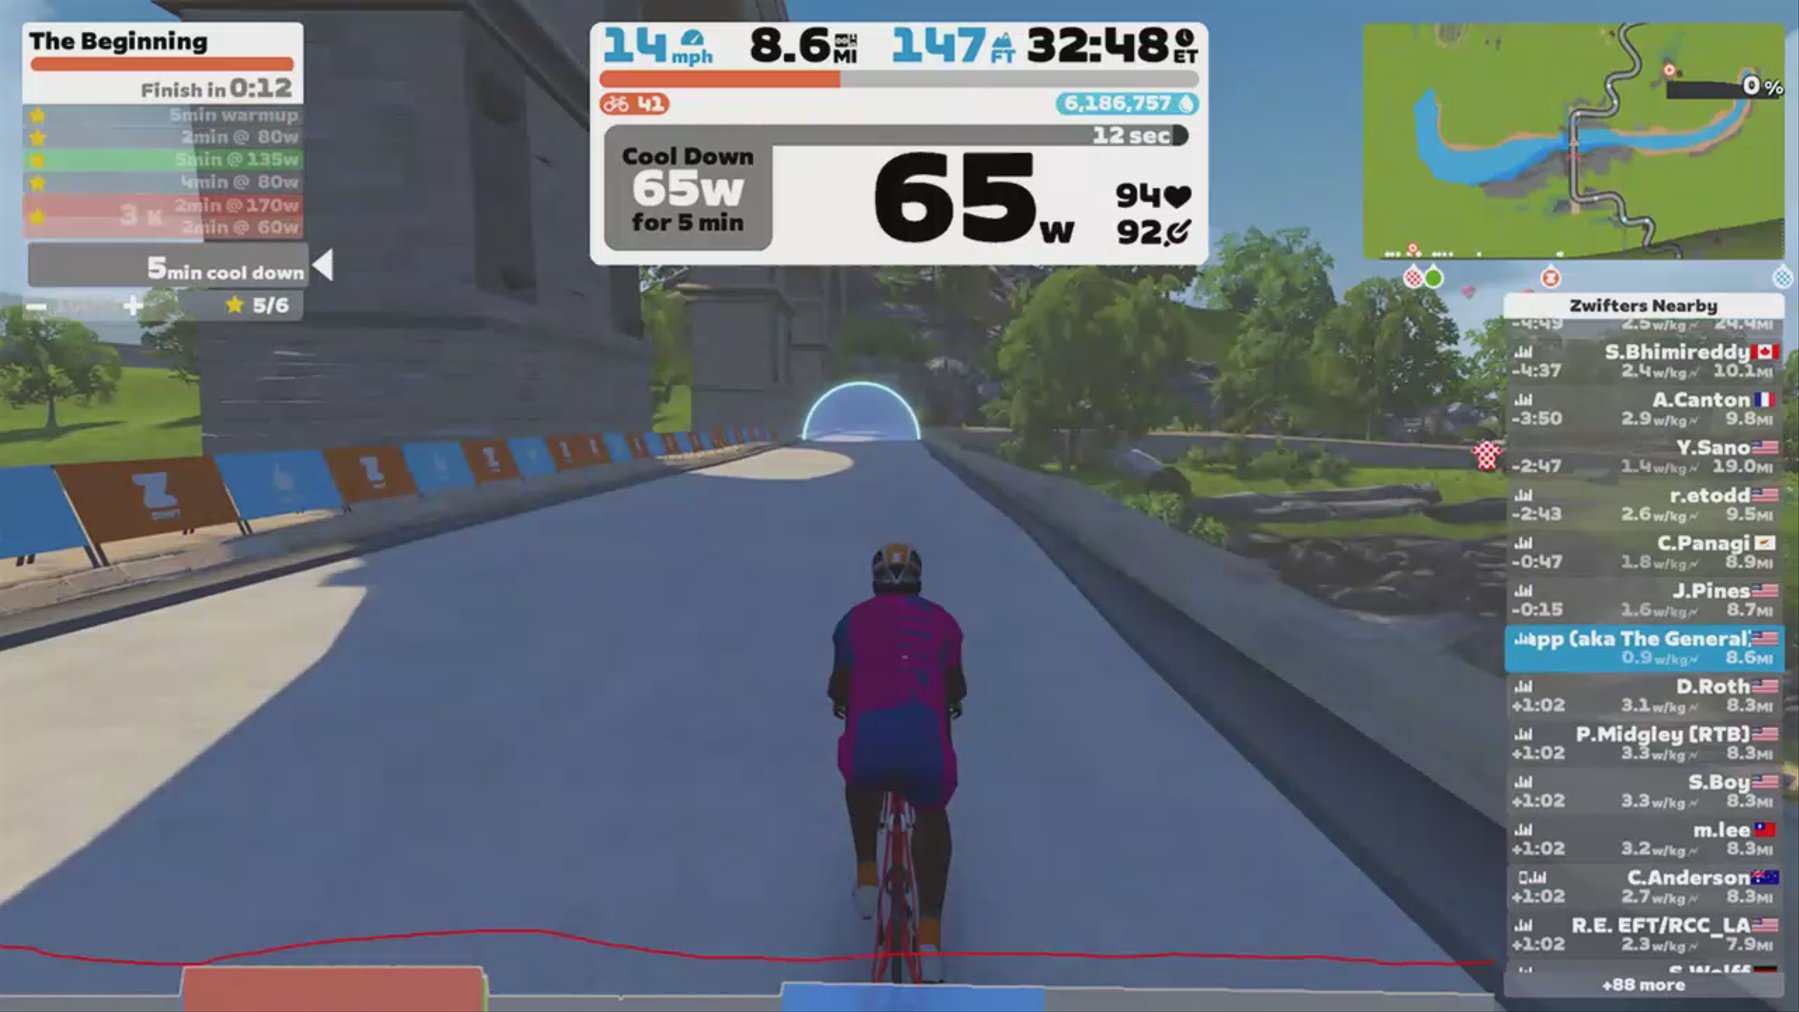 Zwift - The Beginning in France